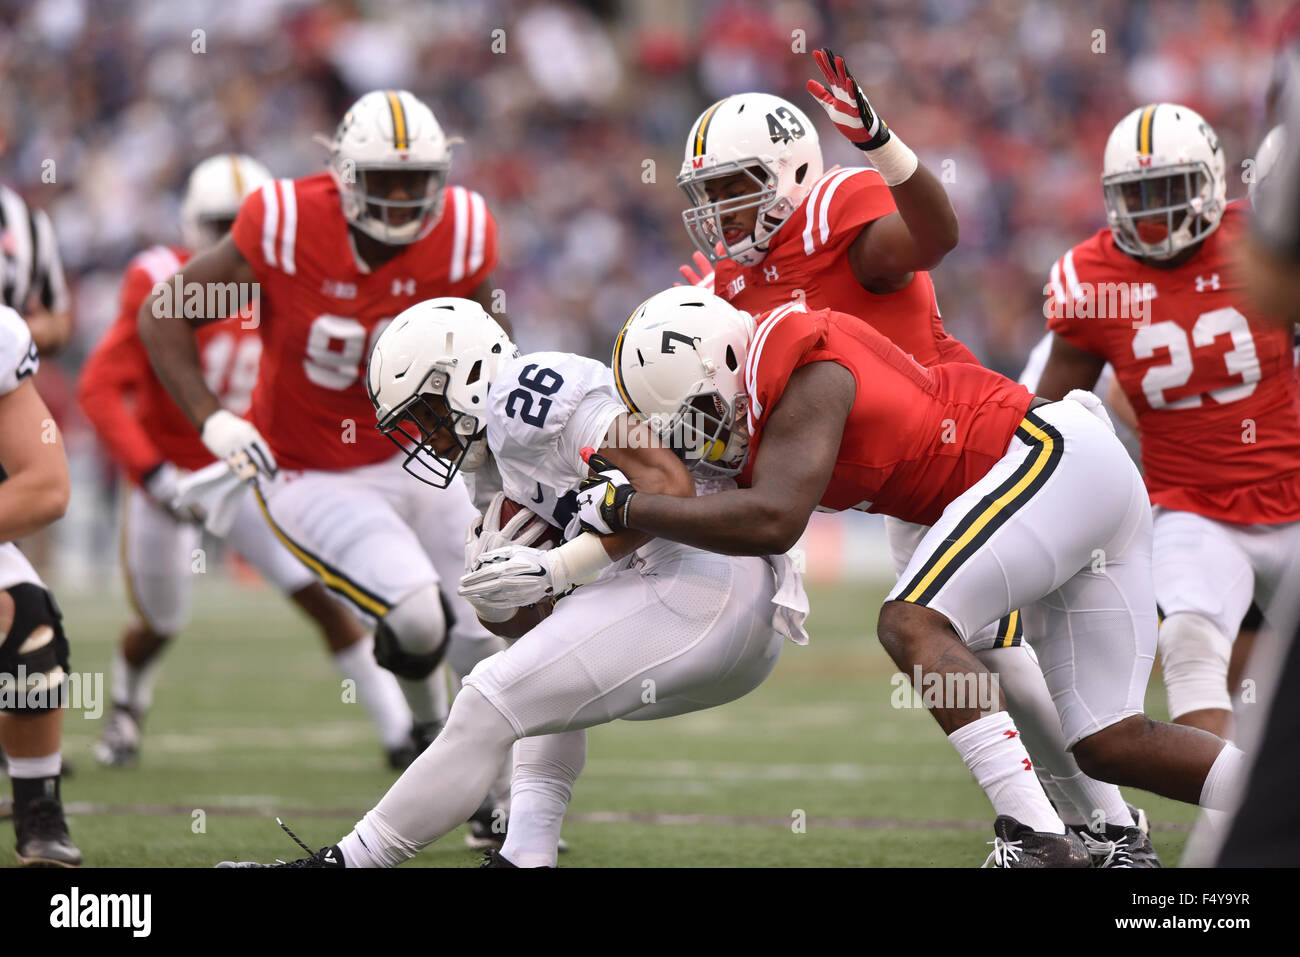 Baltimore, Maryland, USA. 24th Oct, 2015. Penn State Nittany Lions running back SAQUON BARKELY (26) is tackled by Maryland Terrapins defensive lineman YANNICK NGAKOUE (7) during the Big 10 conference football game at M&T Bank Stadium in Baltimore, MD Credit:  Ken Inness/ZUMA Wire/Alamy Live News Stock Photo